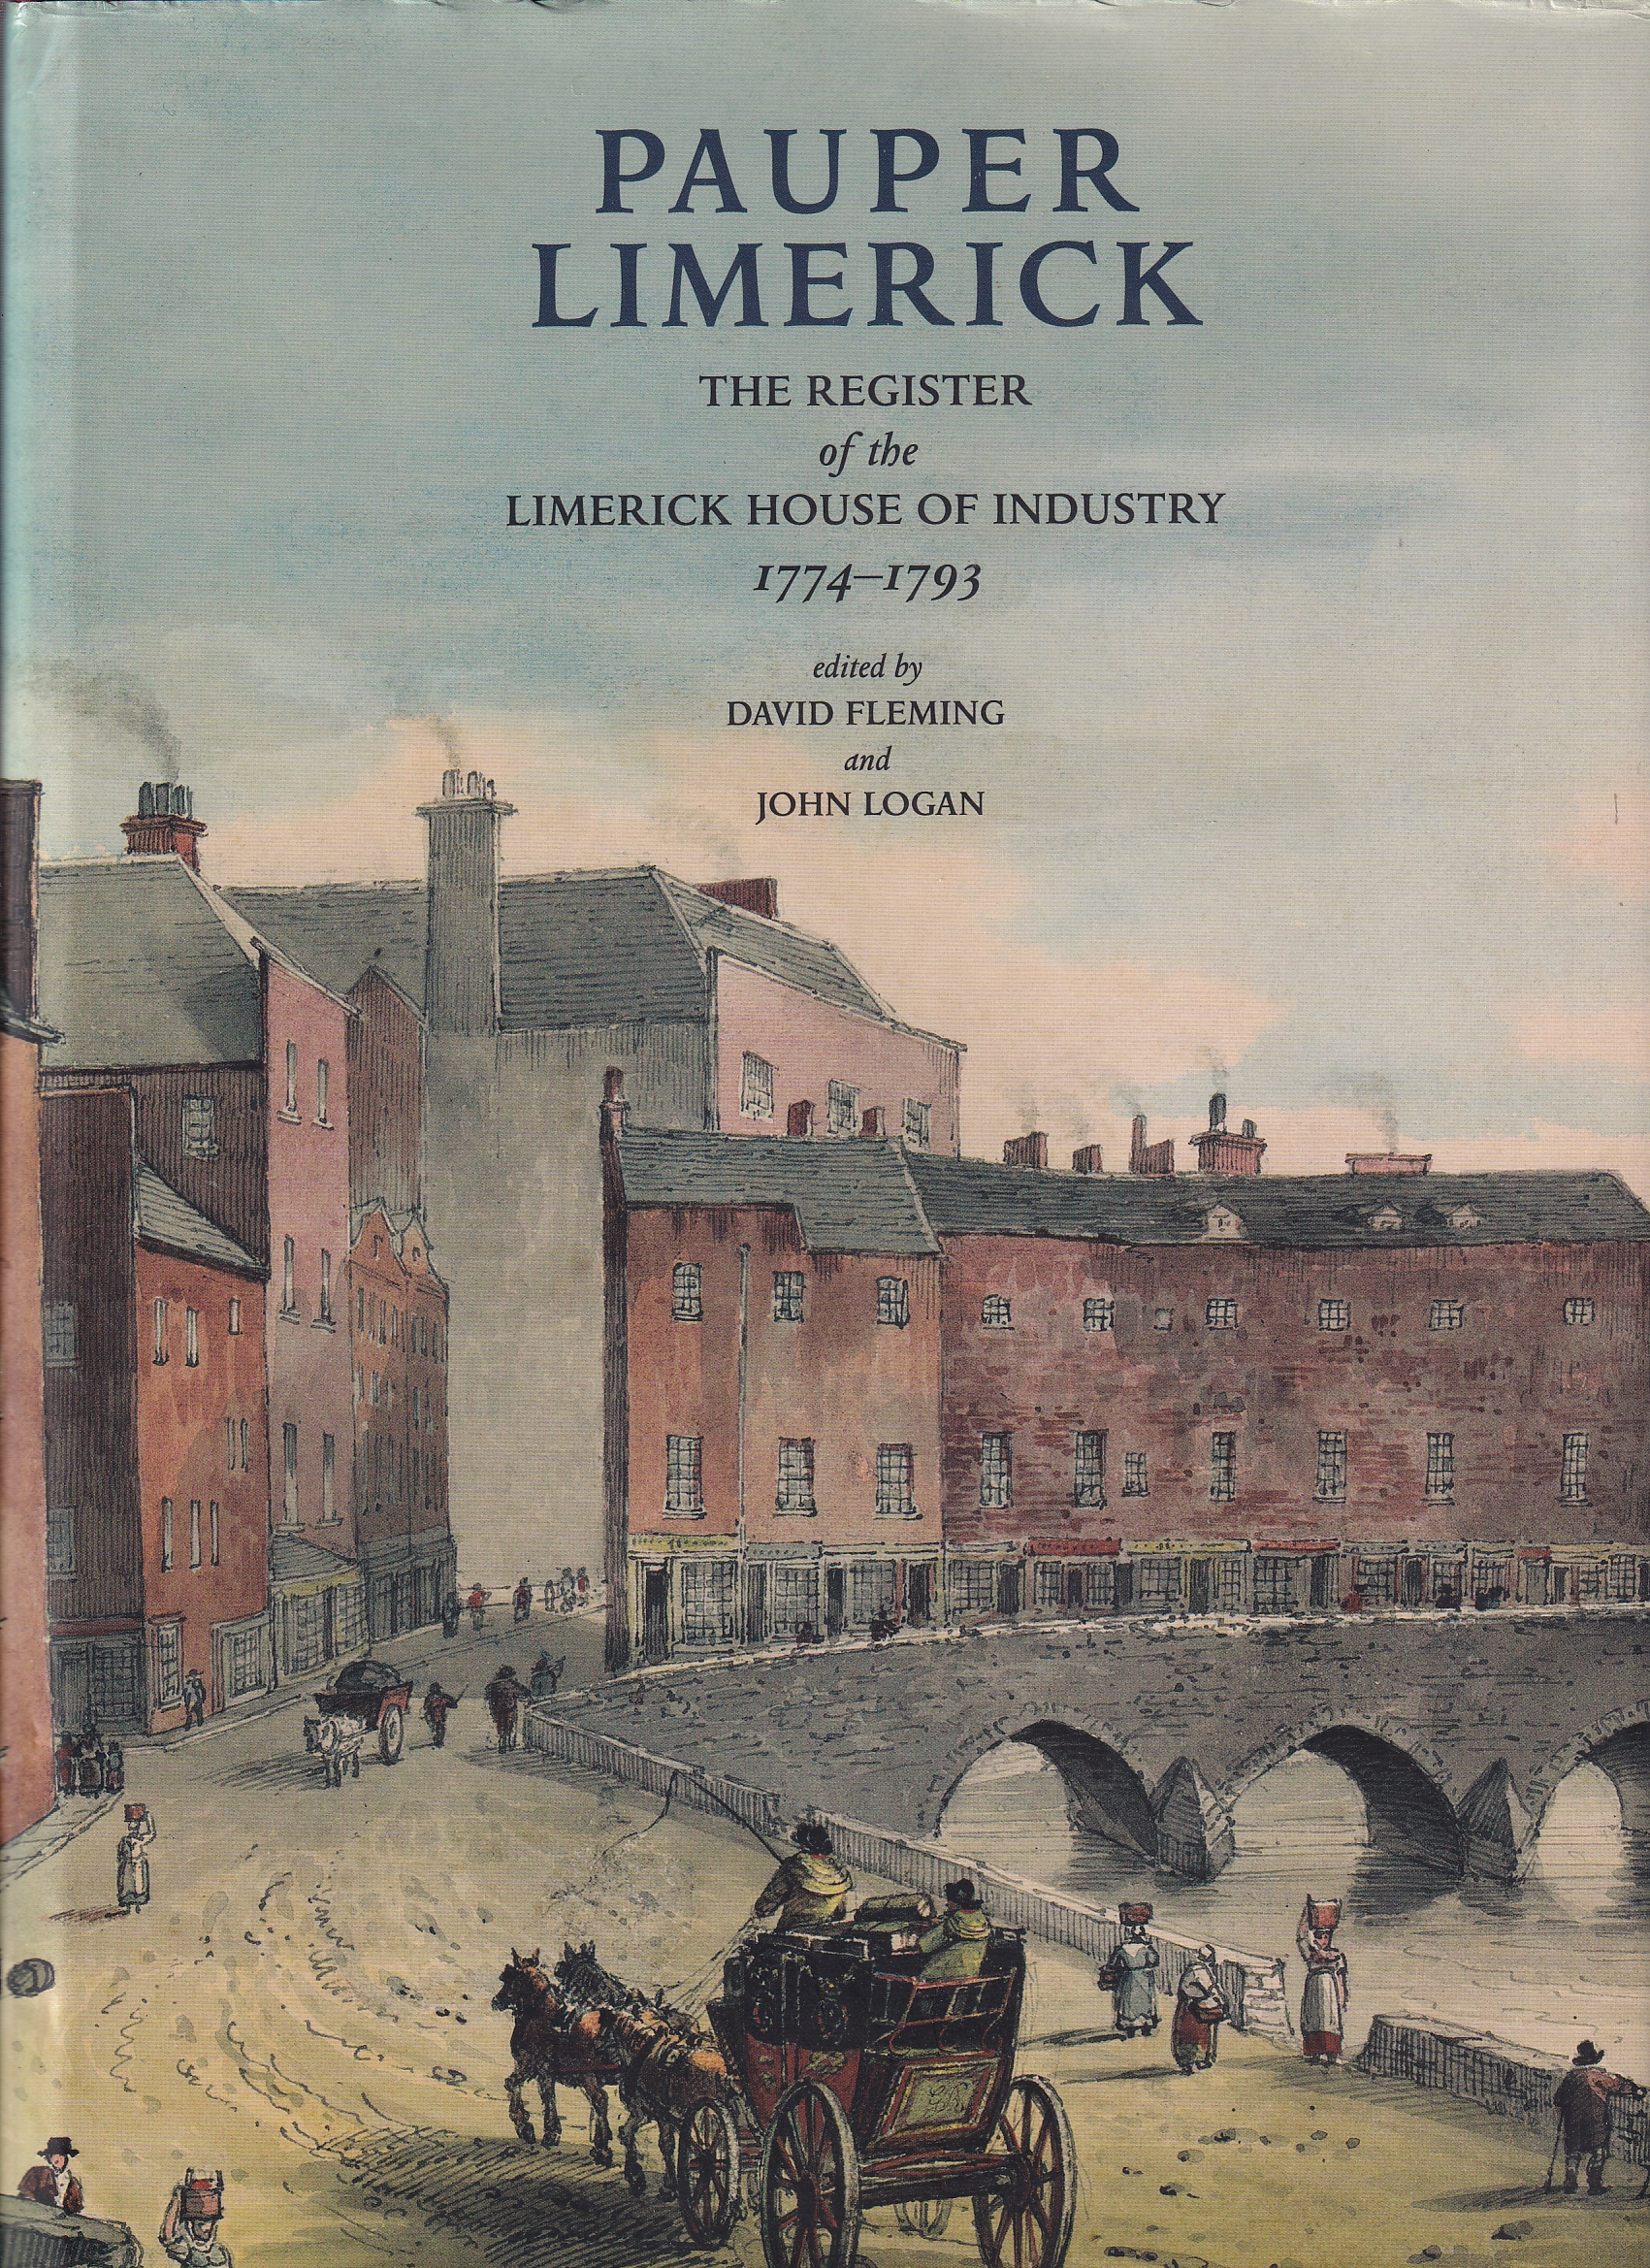 Pauper Limerick: The Register of the Limerick House of Industry 1774-1793 by David Fleming & John Logan